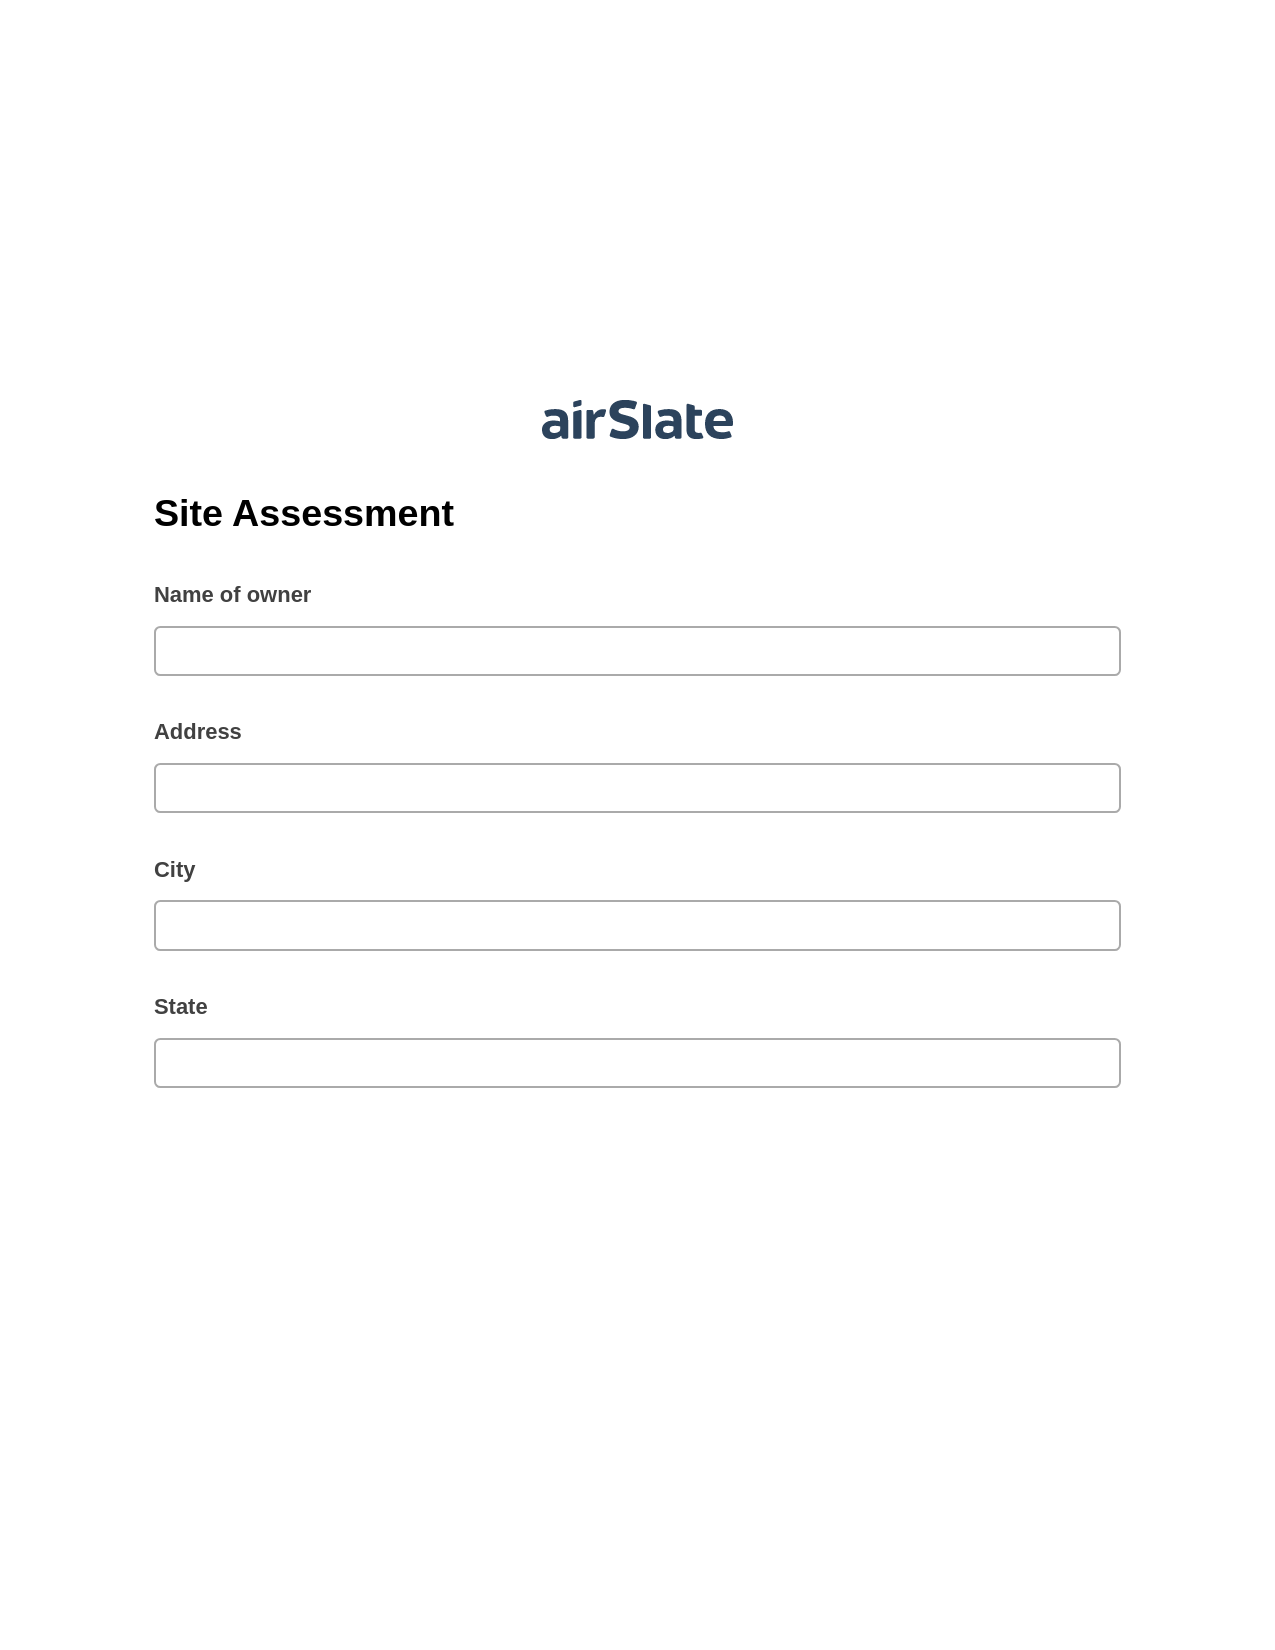 Site Assessment Pre-fill from Google Sheet Dropdown Options Bot, Create Salesforce Record Bot, Slack Two-Way Binding Bot